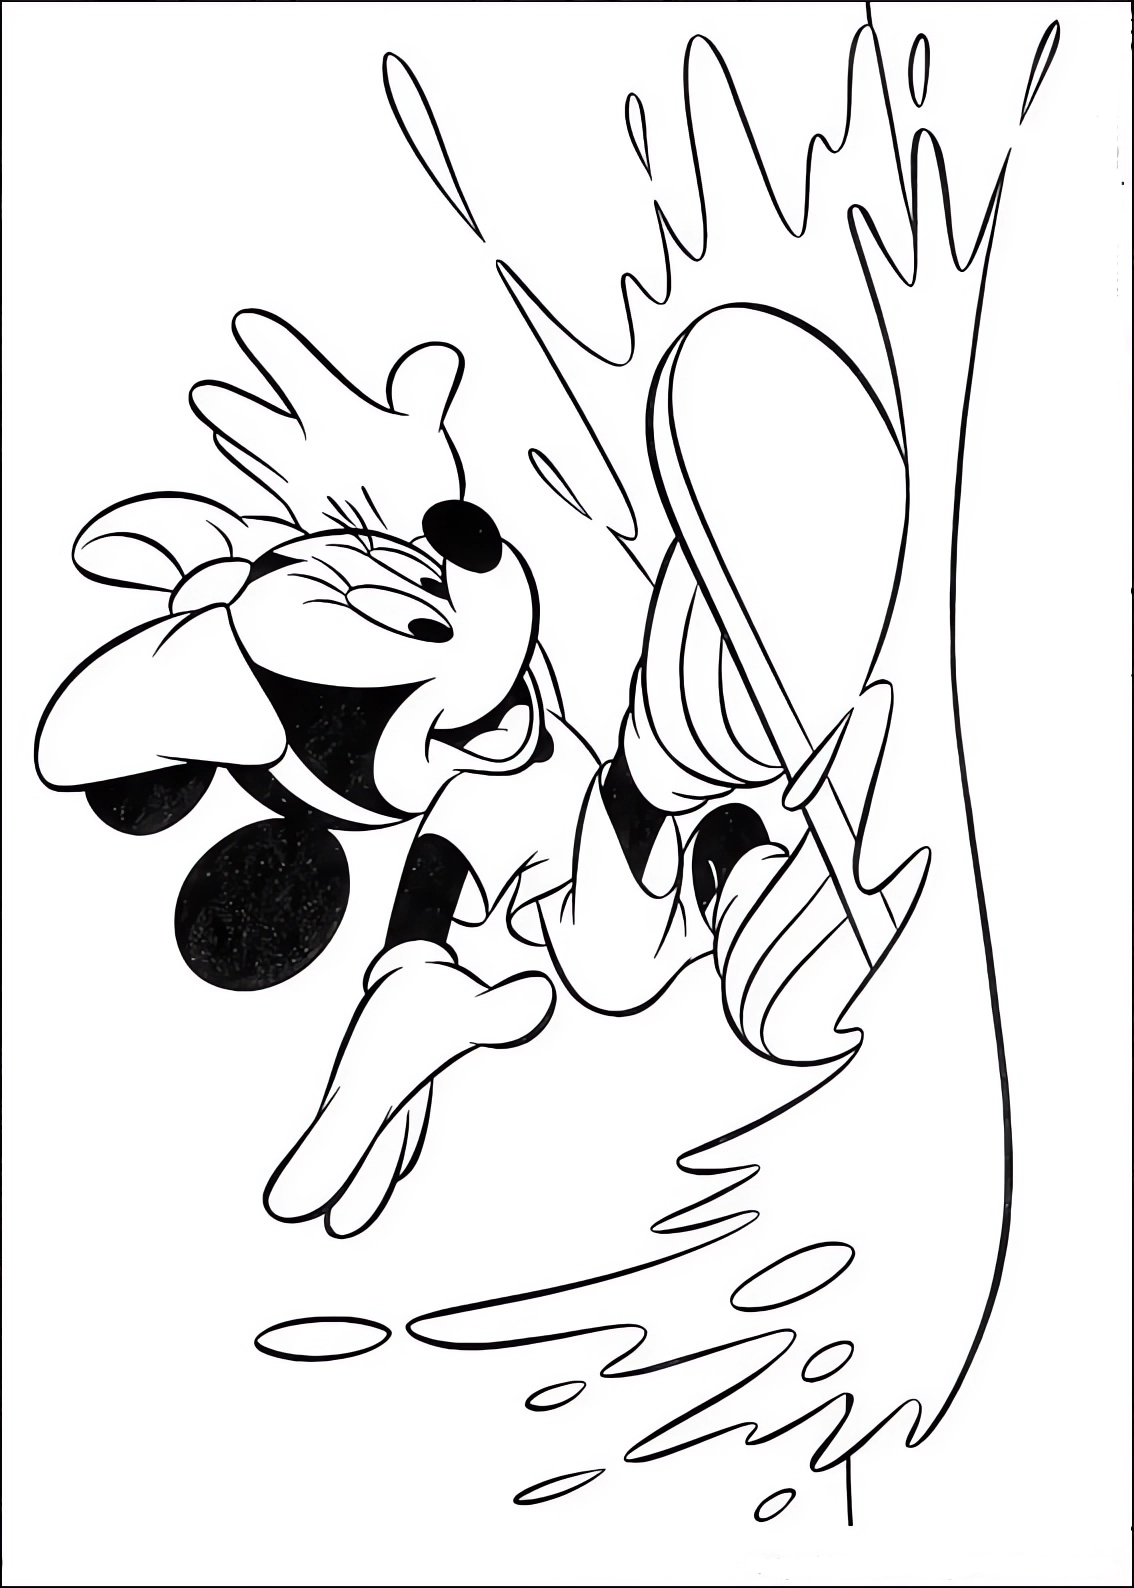 Coloring page of Minnie surfing